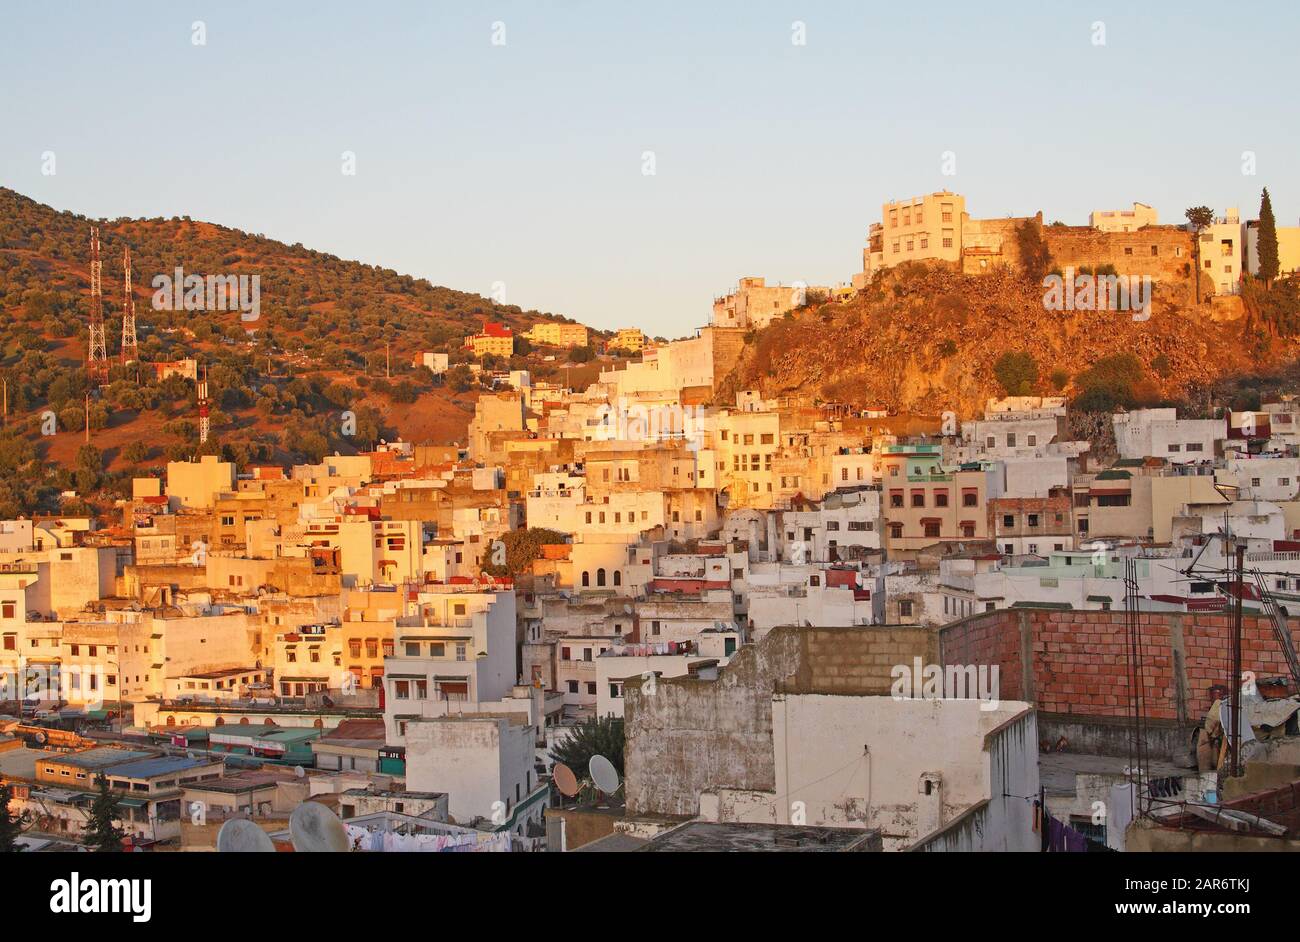 The hillside town of Moulay Idriss Zerhoun, Fes-Meknes region of northern Morocco Stock Photo